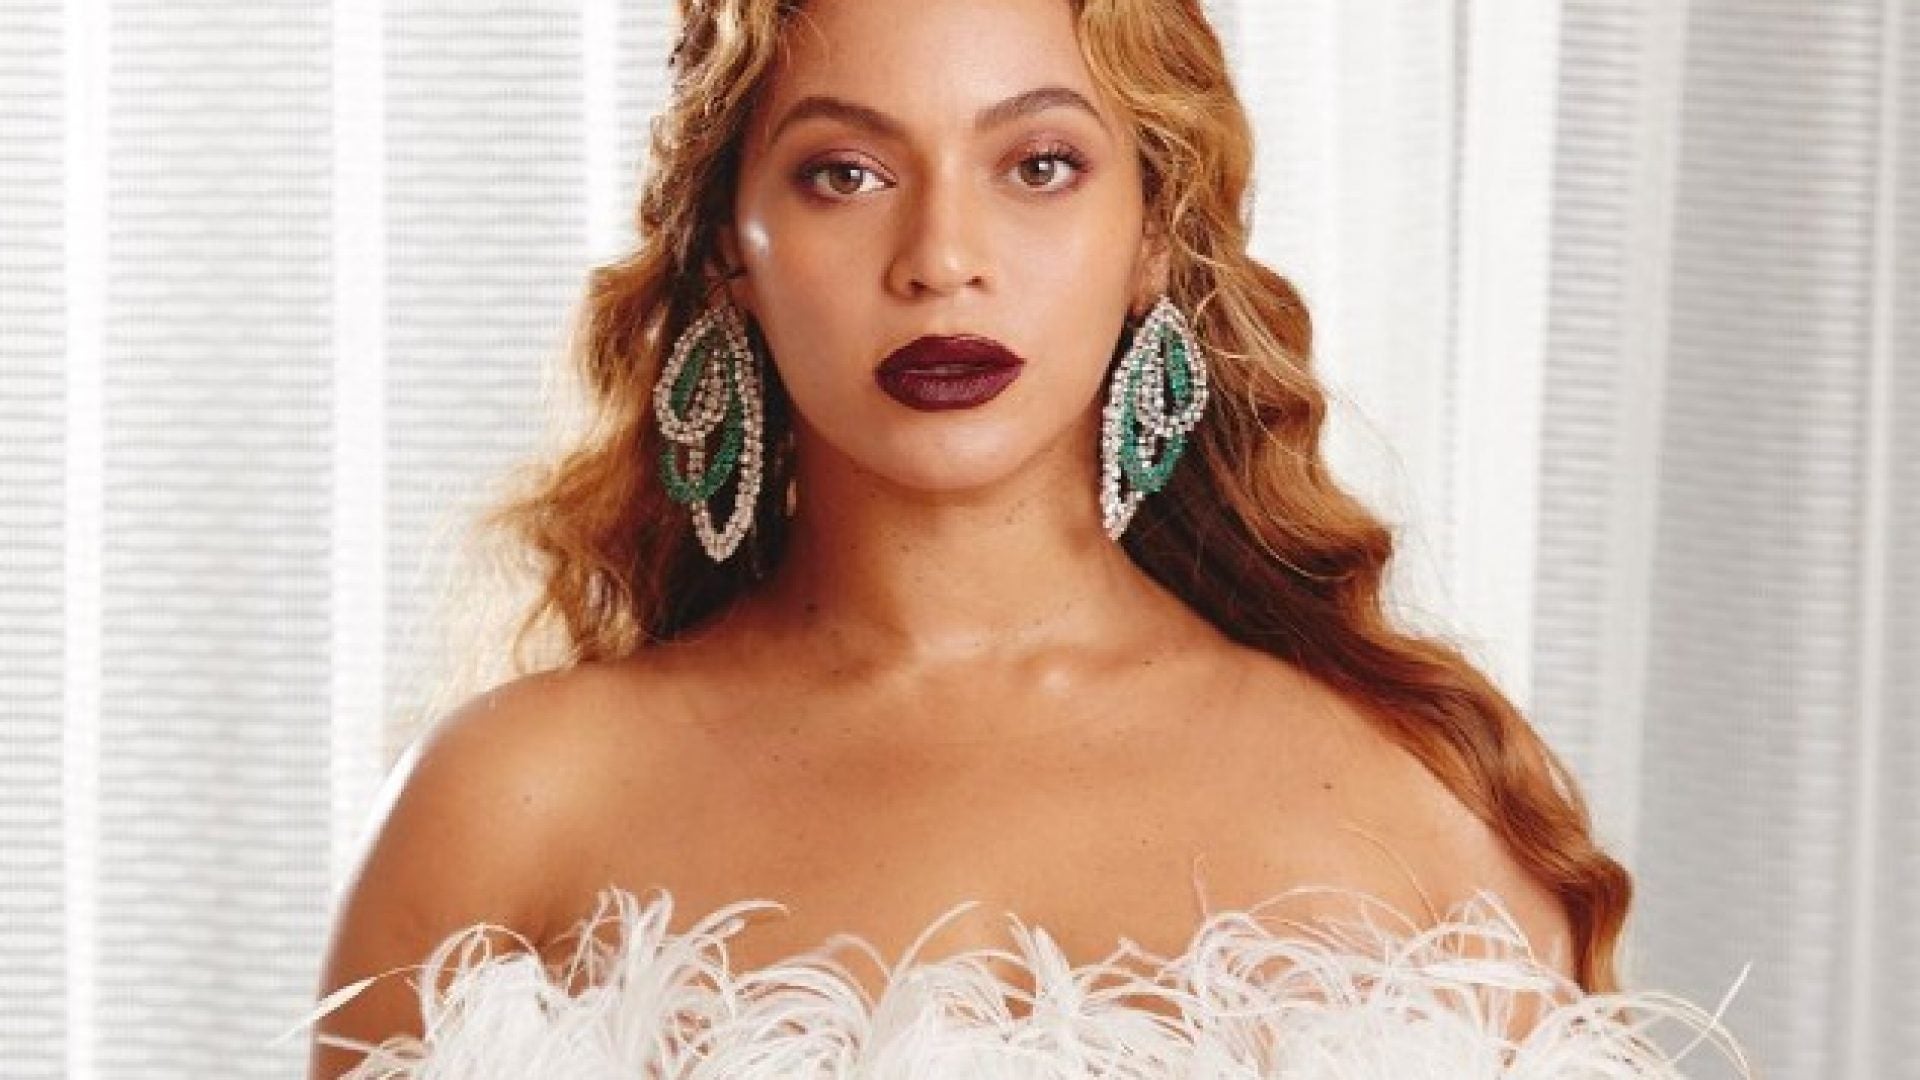 7 Times Beyoncé Was Speaking Directly To My Black Beauty In Her ‘Ask Me Anything' Interview